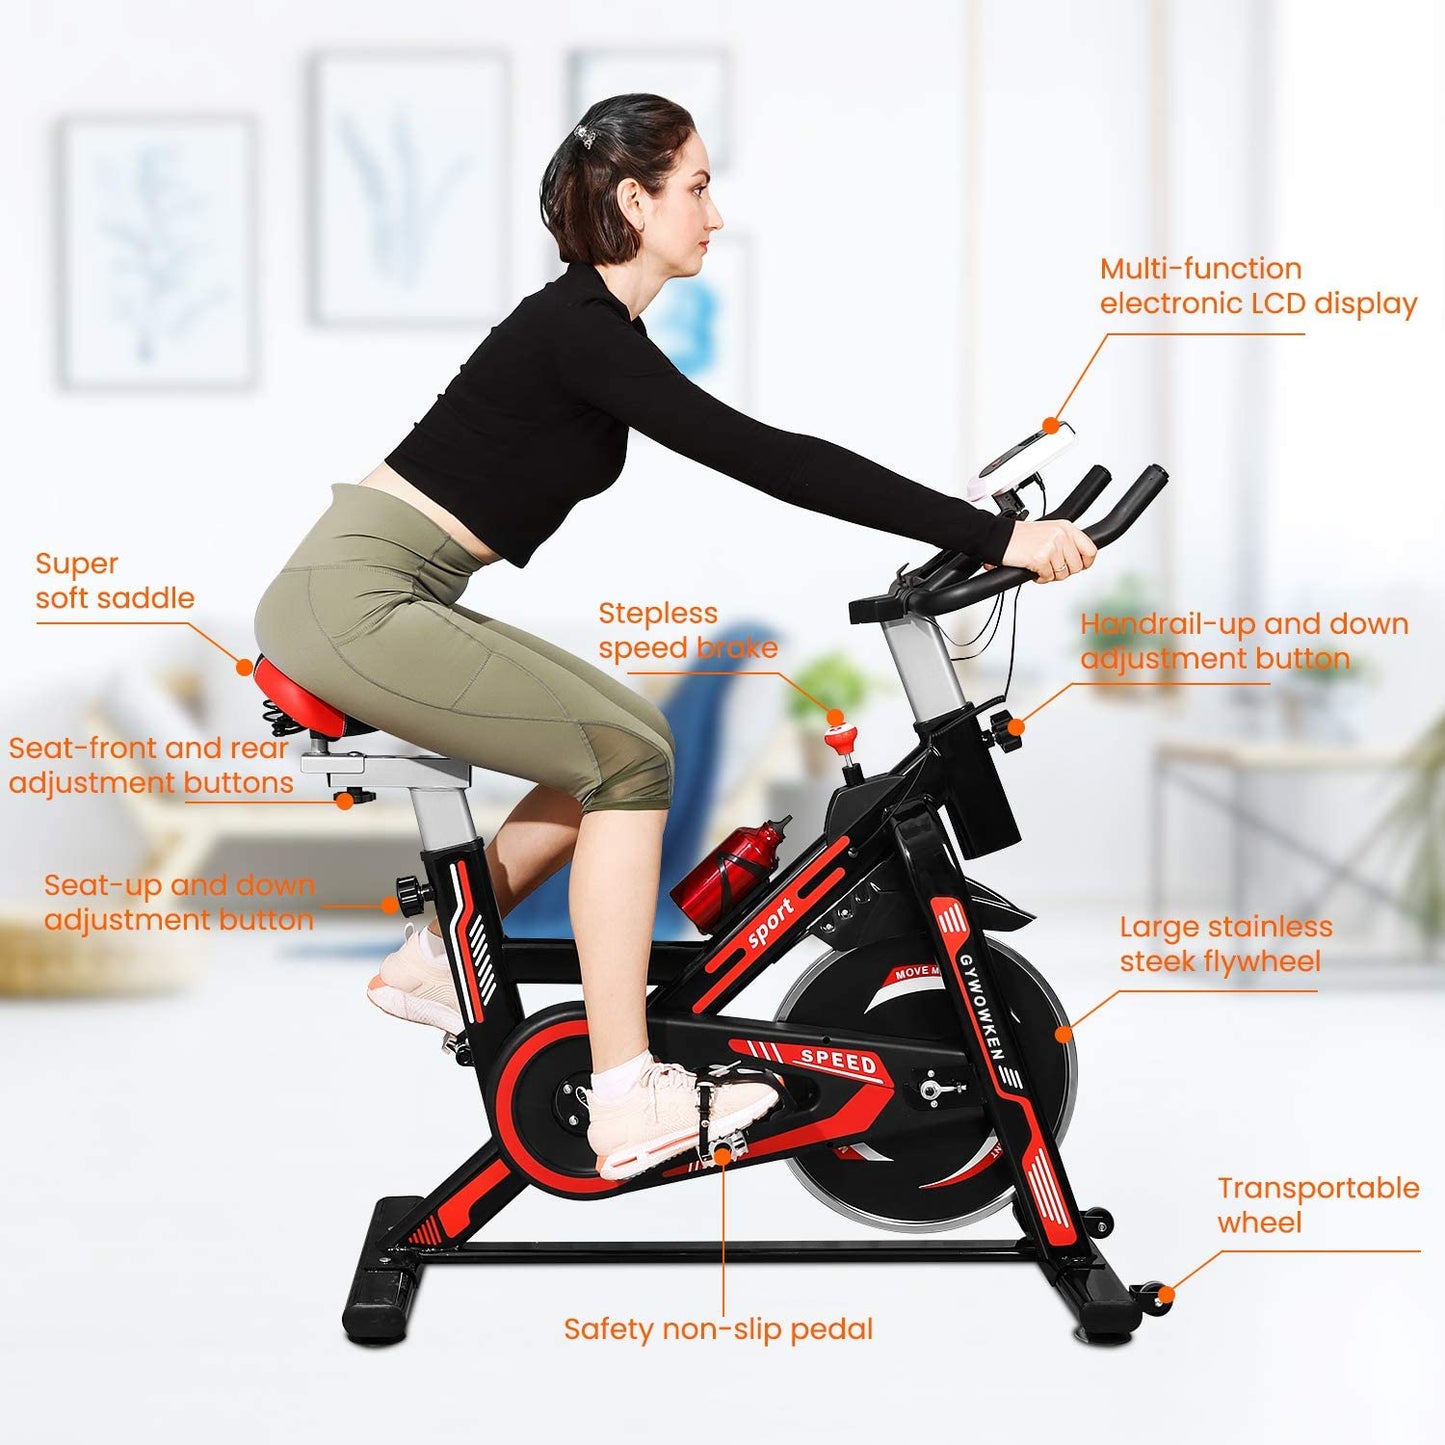 Home Gym Exercise Spin Sport Bike